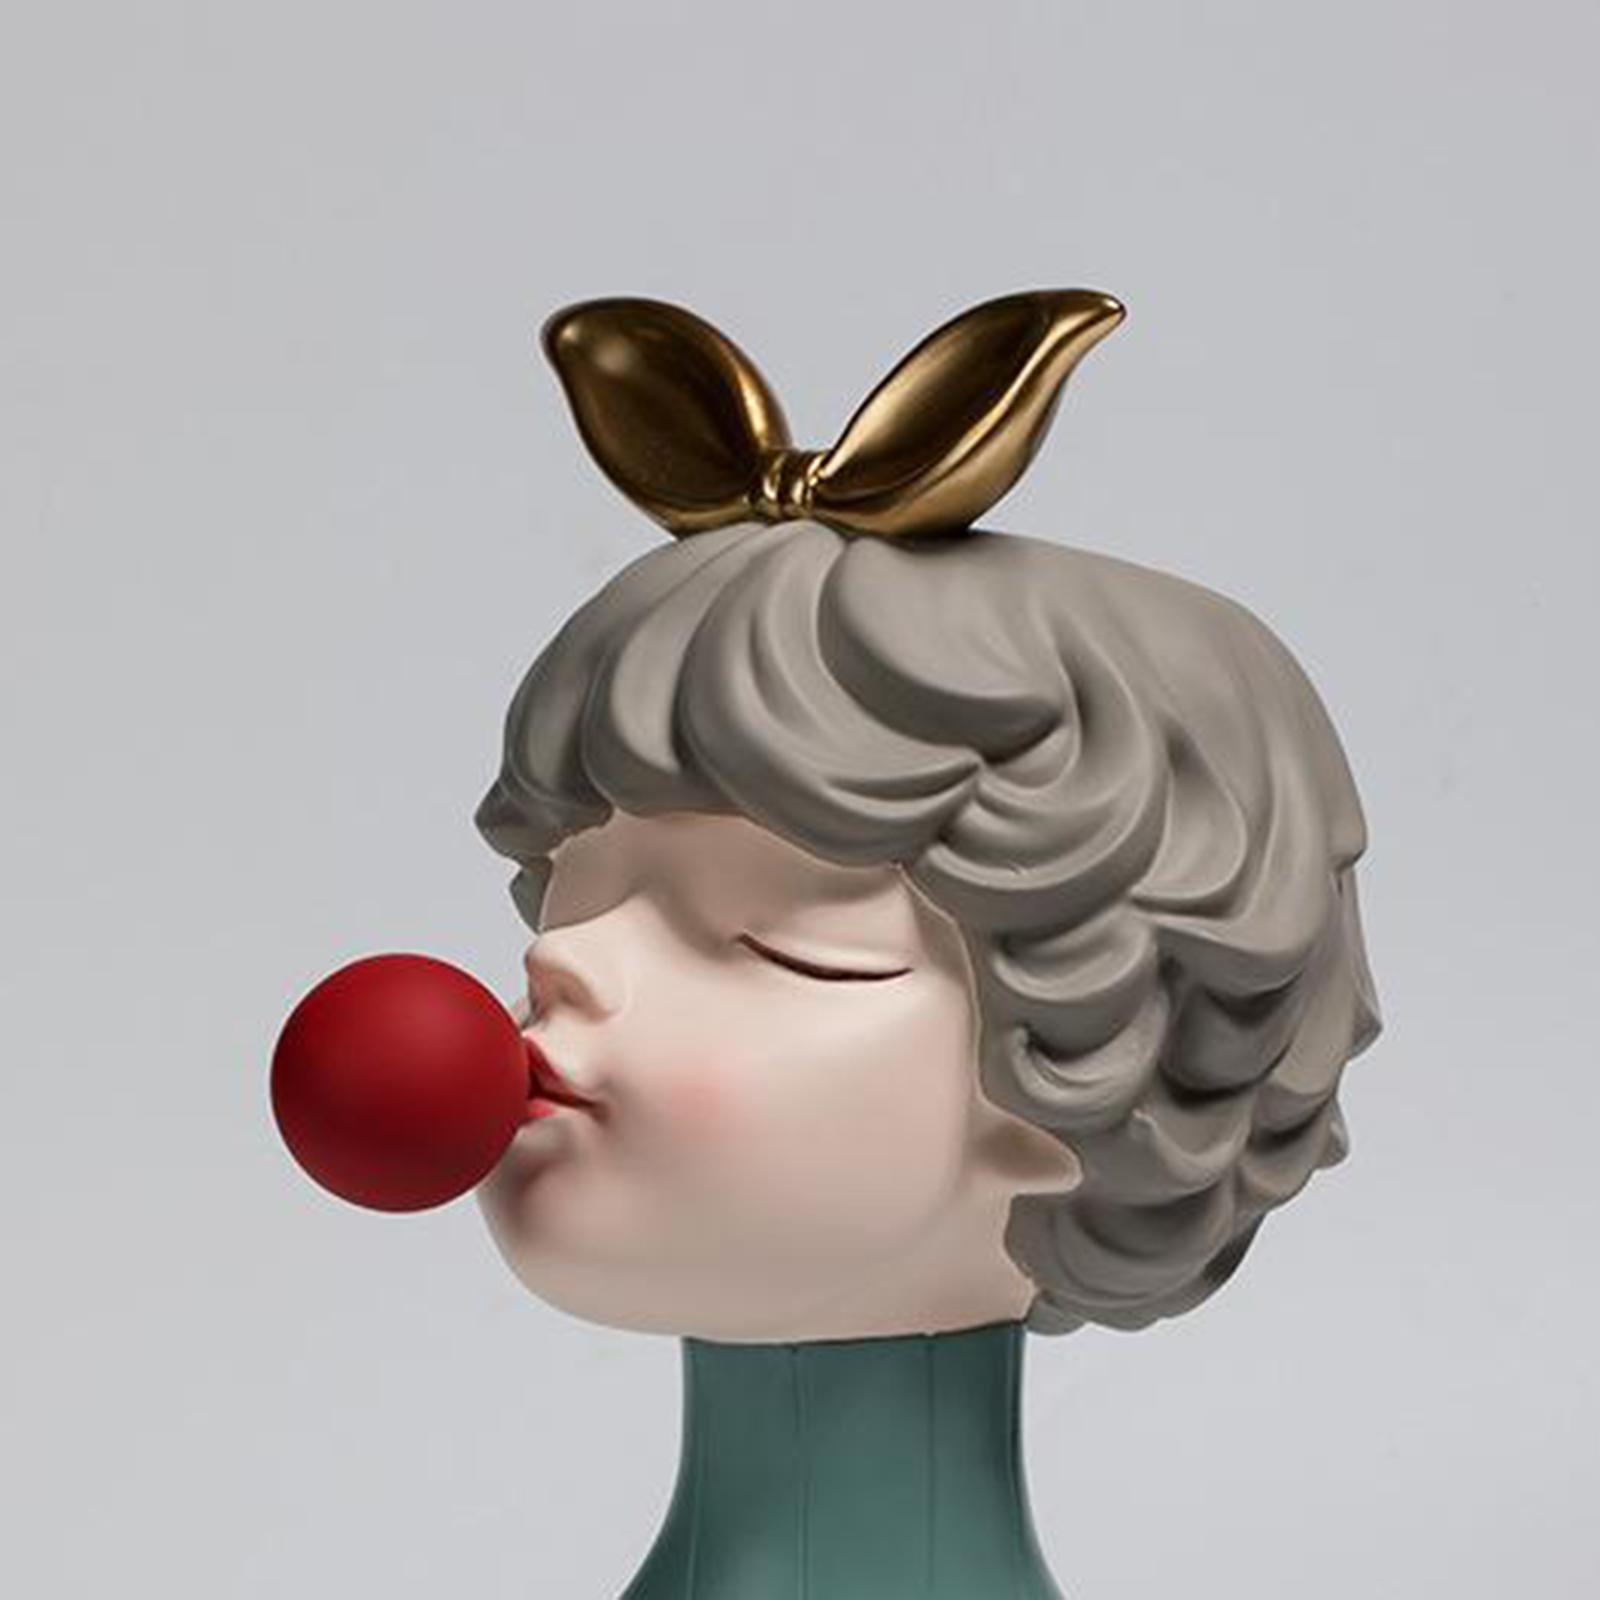 Blowing Bubbles Girl Creative Vase Decoration Ornaments Water Cultivation Flowers Bottle Dry Vase Home Living Room Table Art Statue